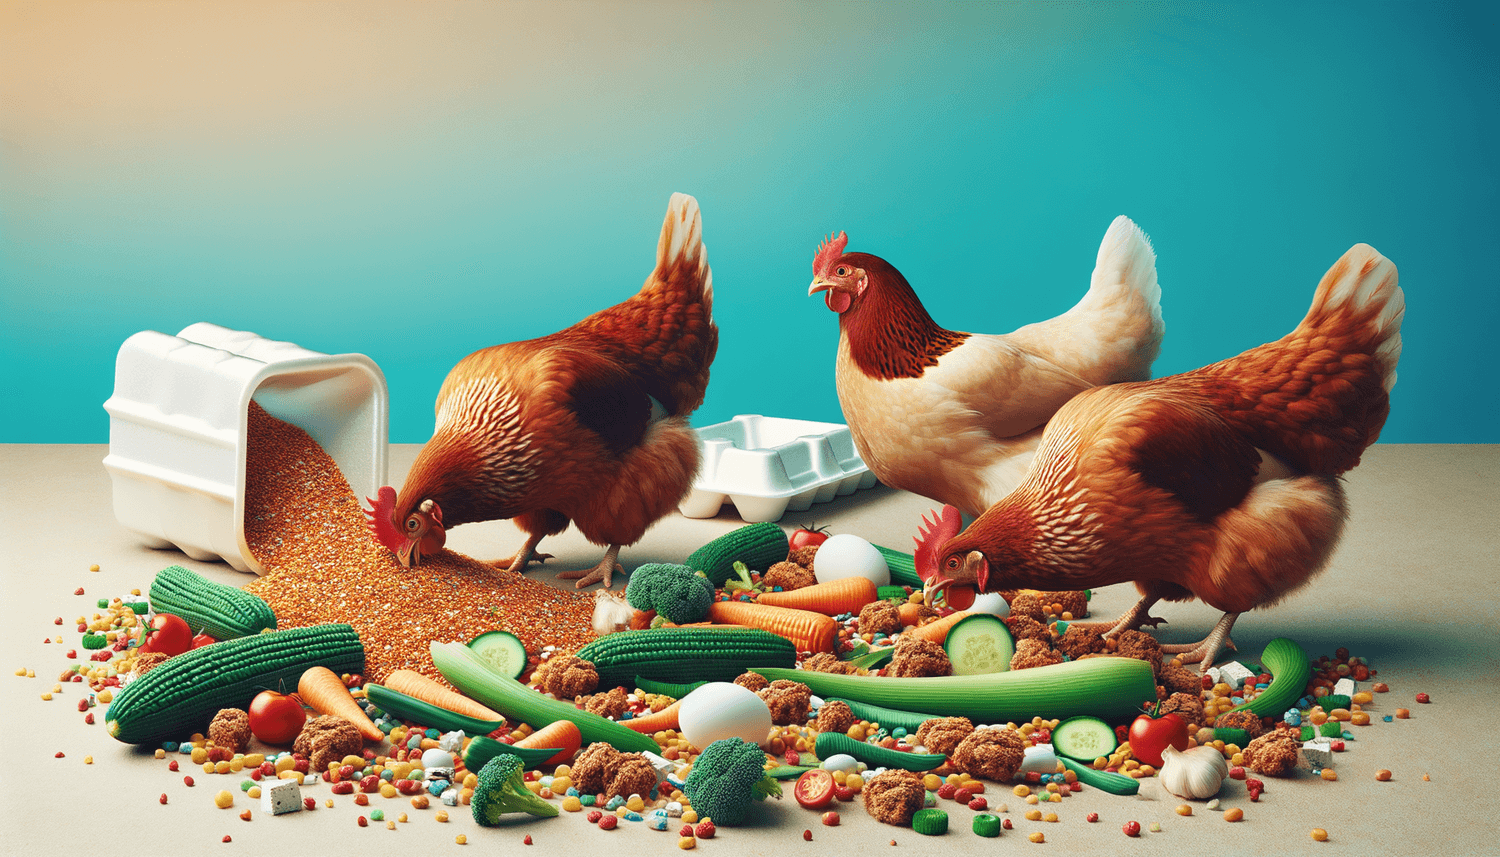 Can Chickens Eat Styrofoam?